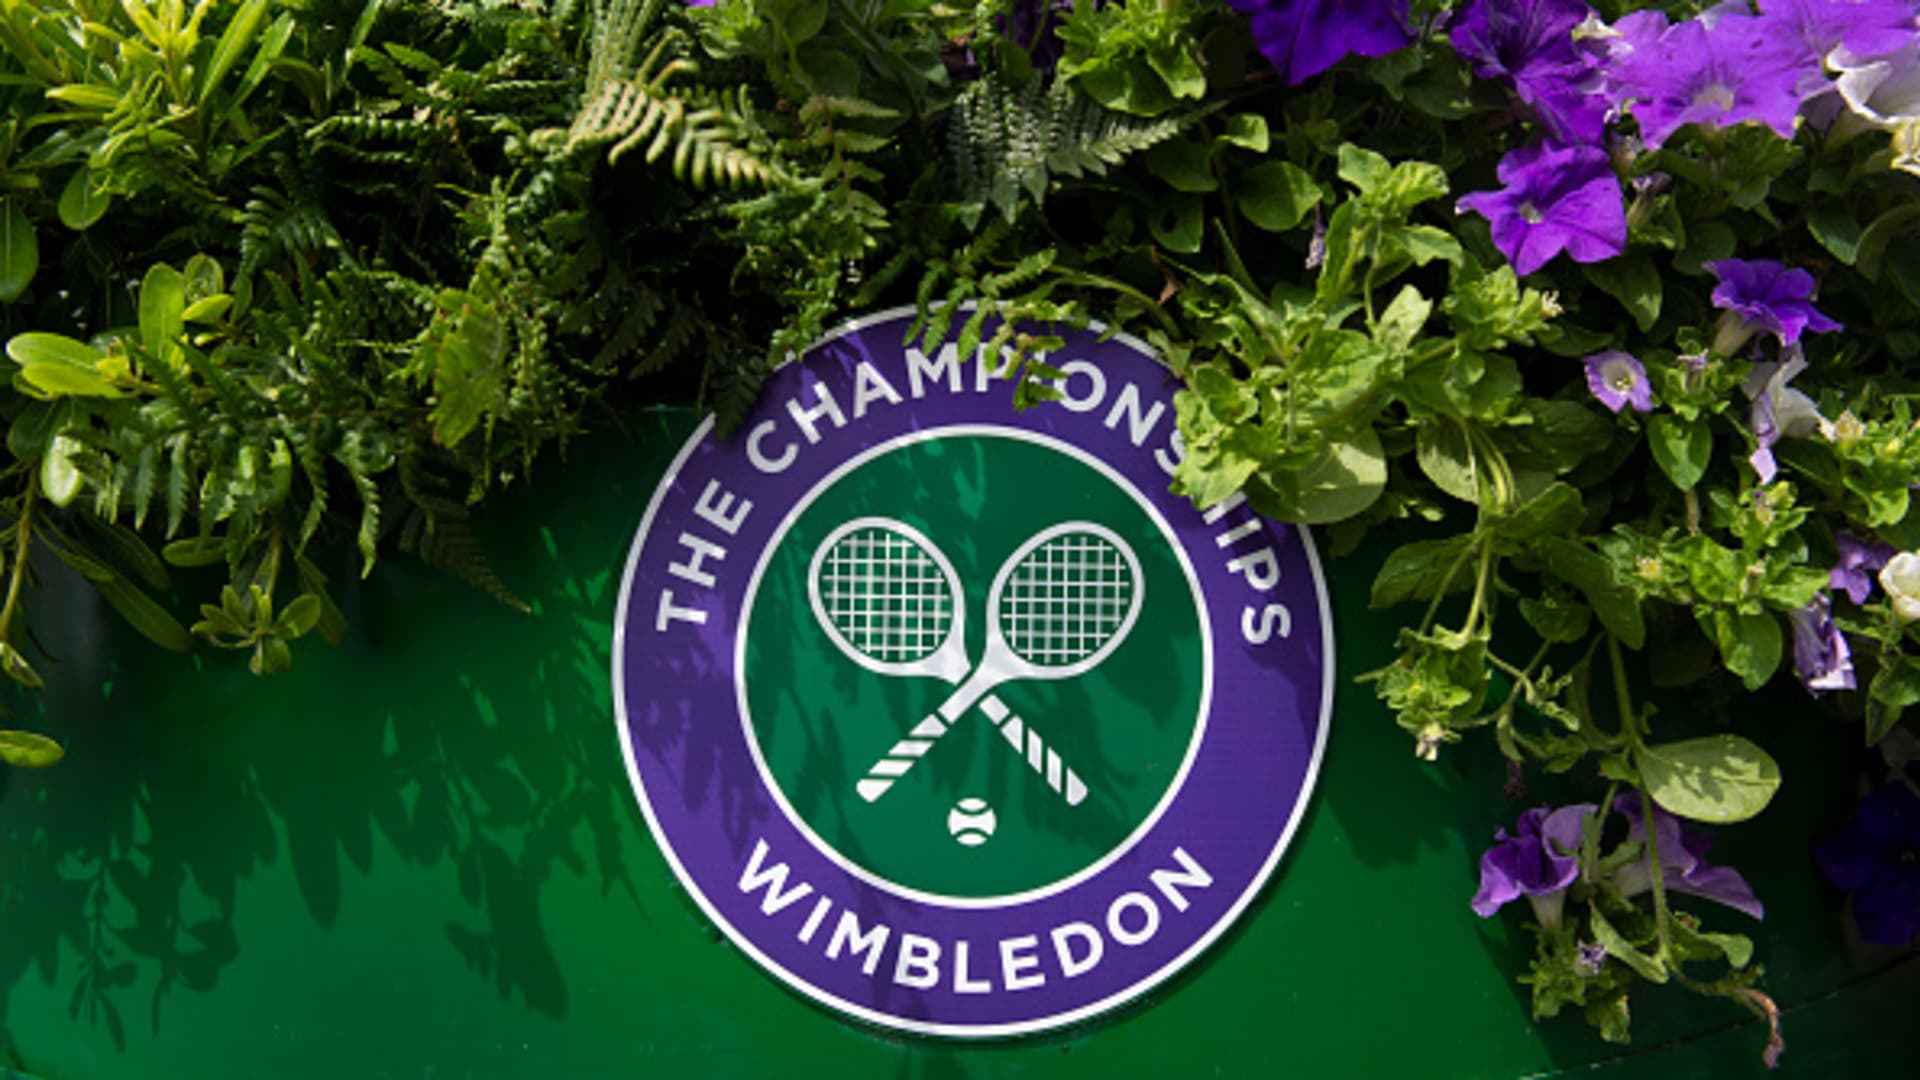 The Wimbledon logo amongst flowers The Championships at All England Lawn Tennis and Croquet Club on July 10, 2019 in London, England.